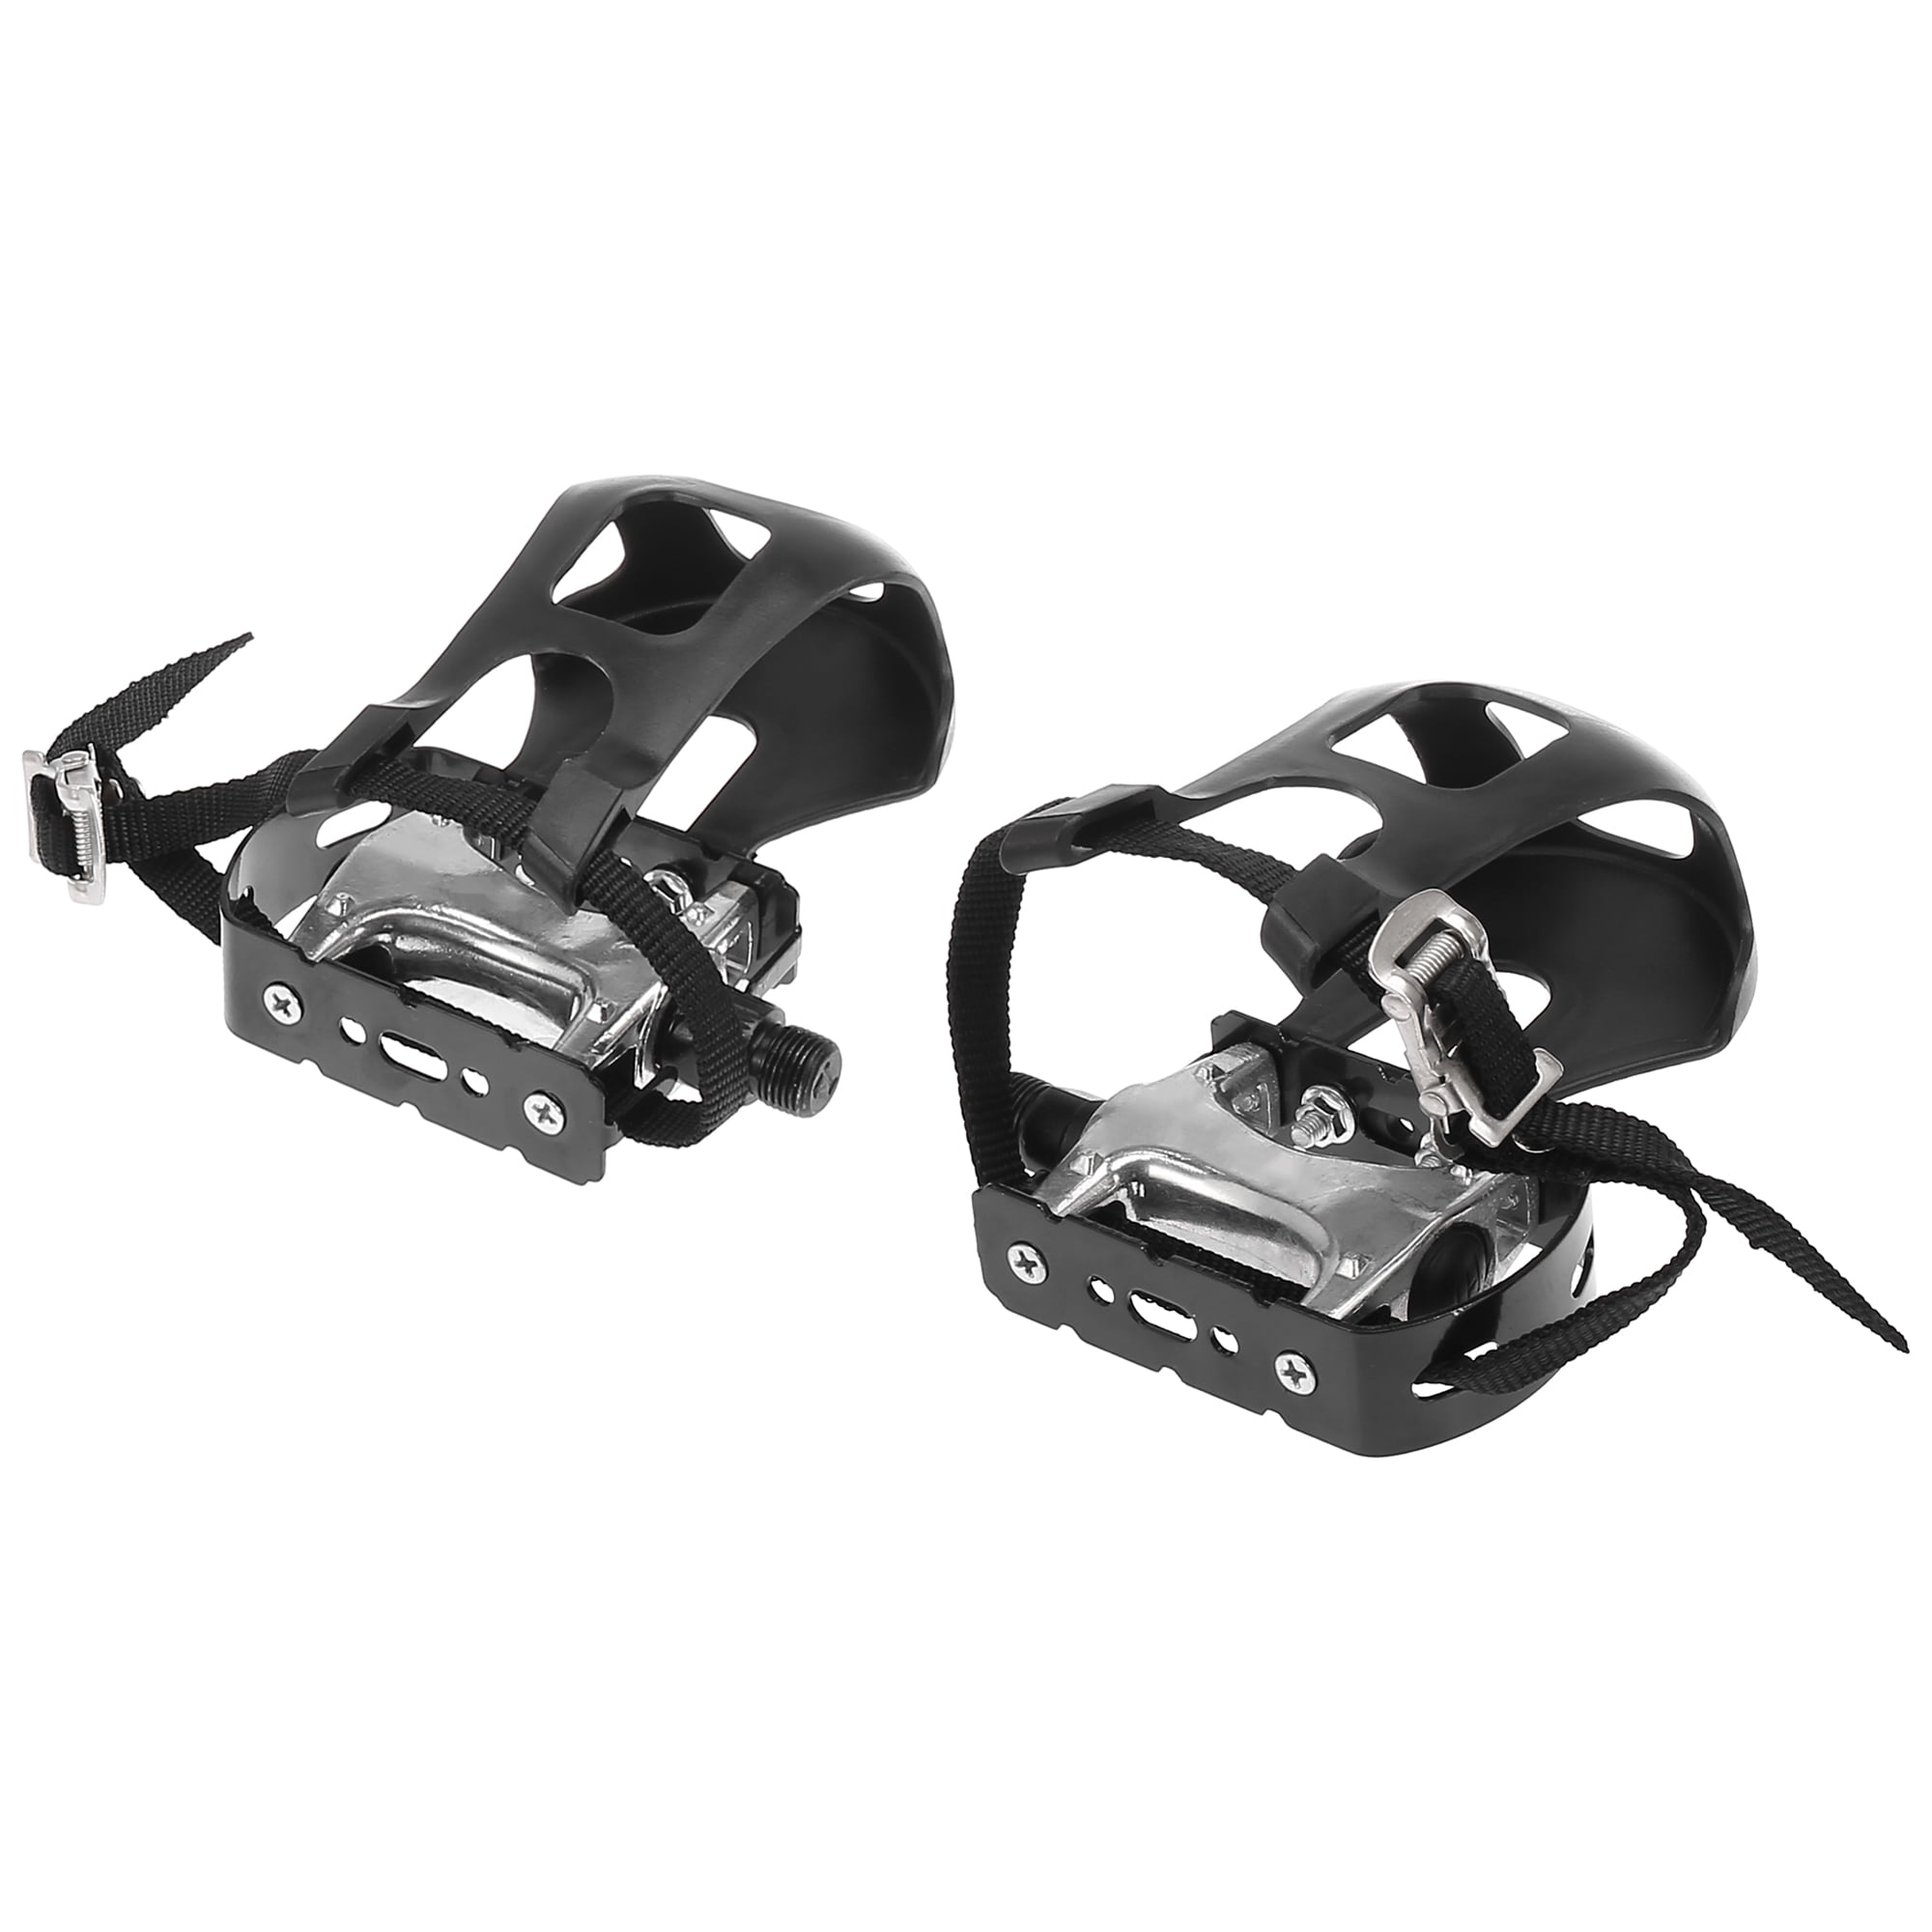 NEW Clear Two Tone Wide Platform Bicycle Pedals 9/16"  MTB BMX FIXIES ROAD 